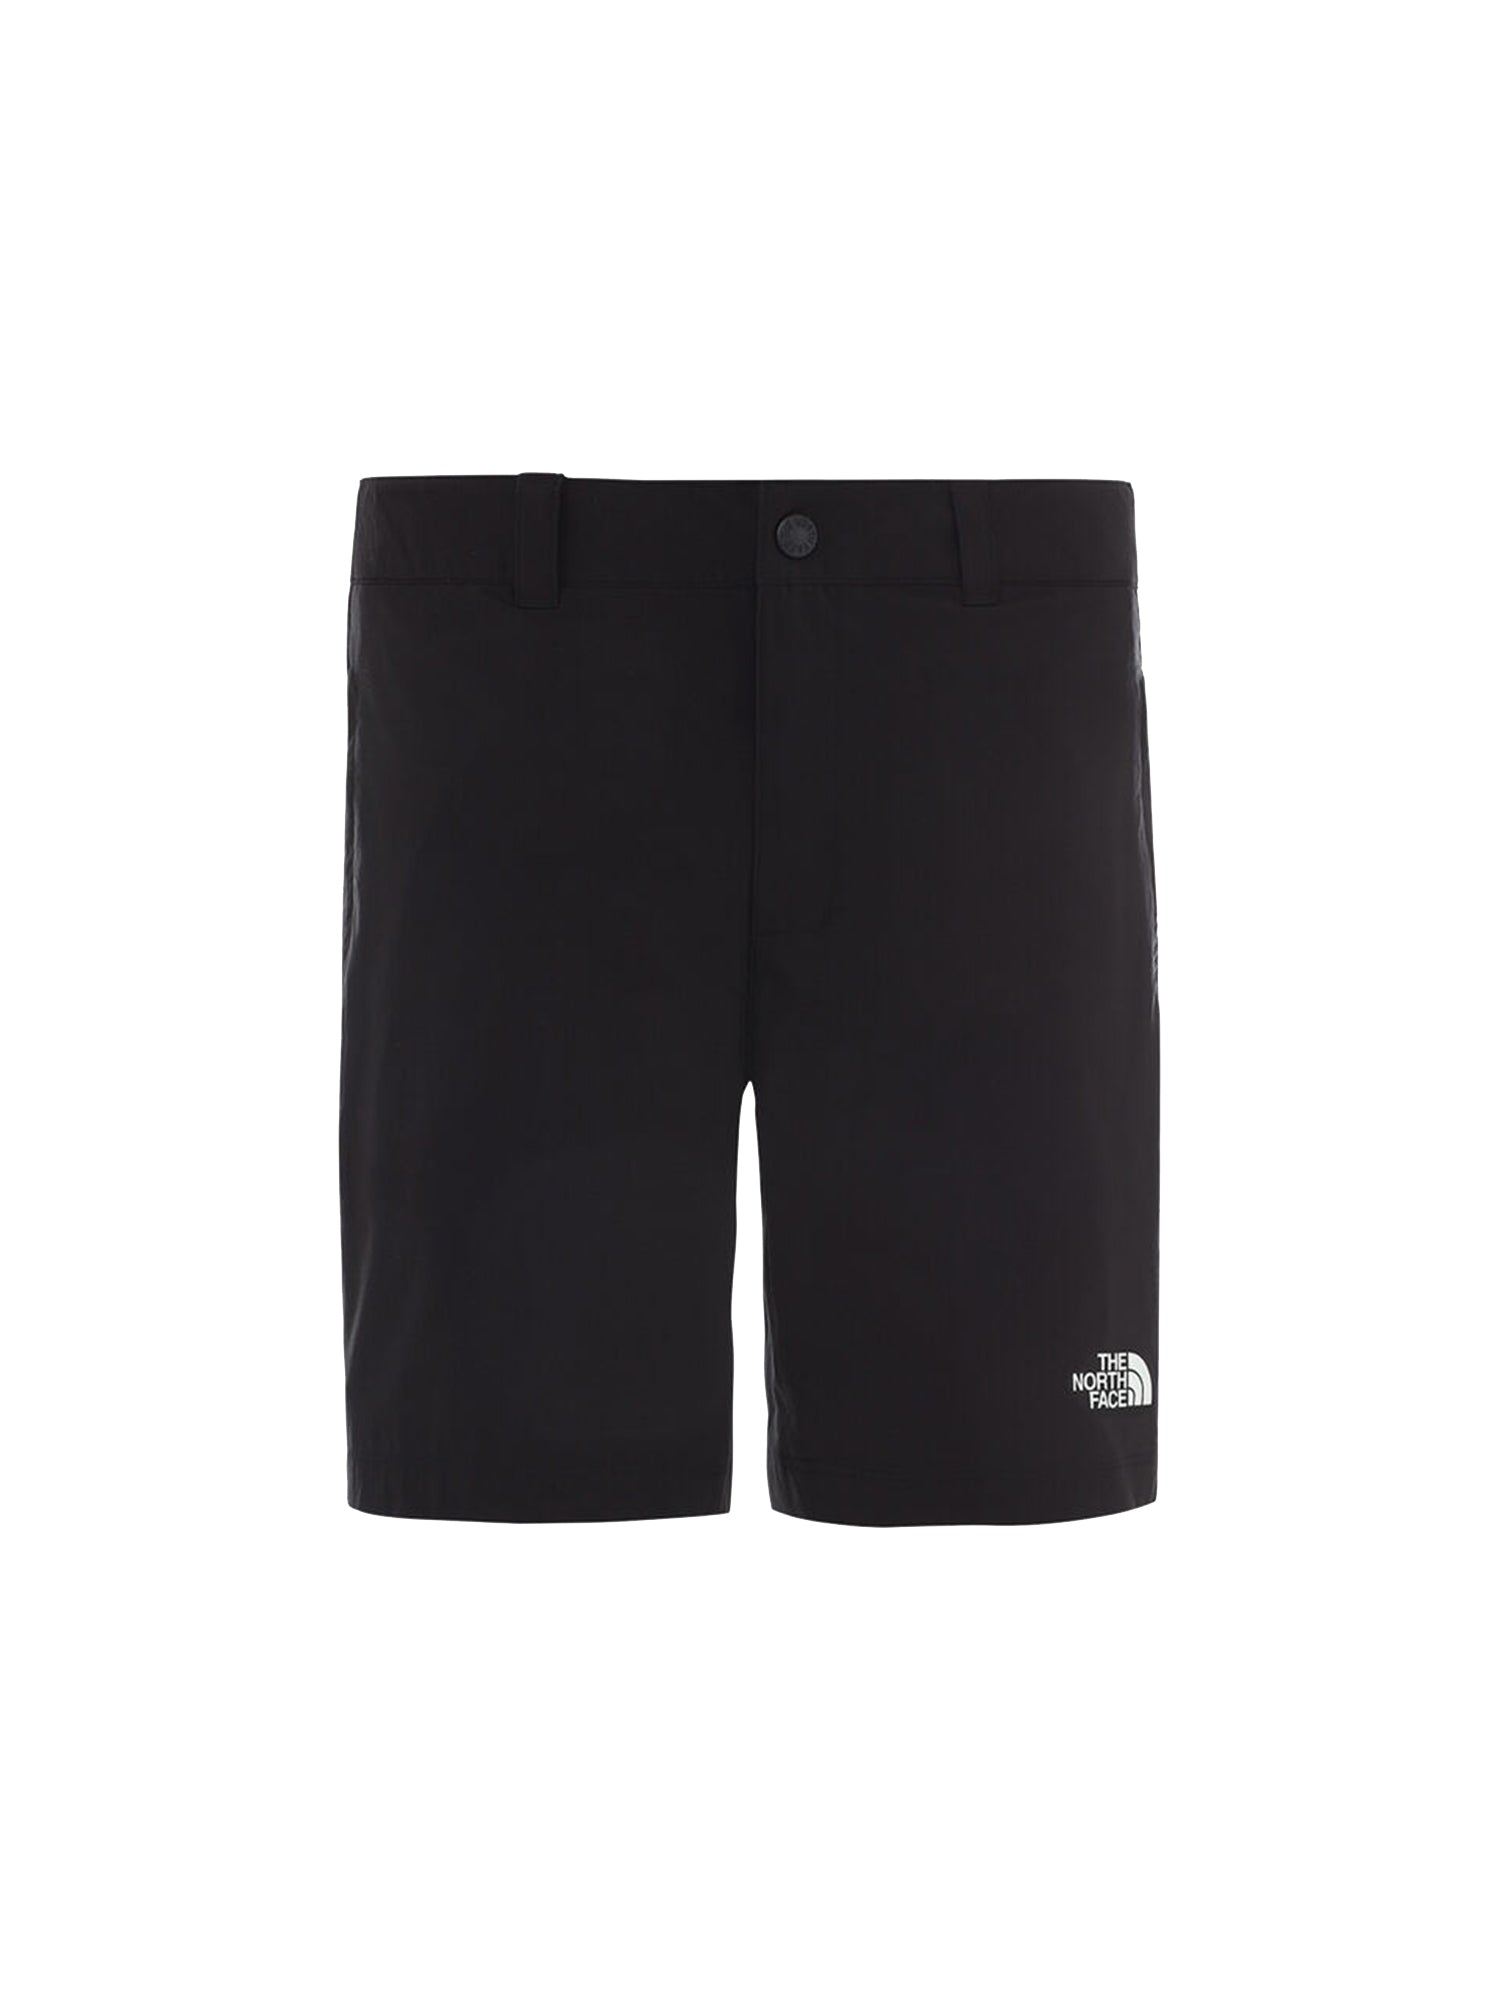 THE NORTH FACE EXTENT III SHORT NERO